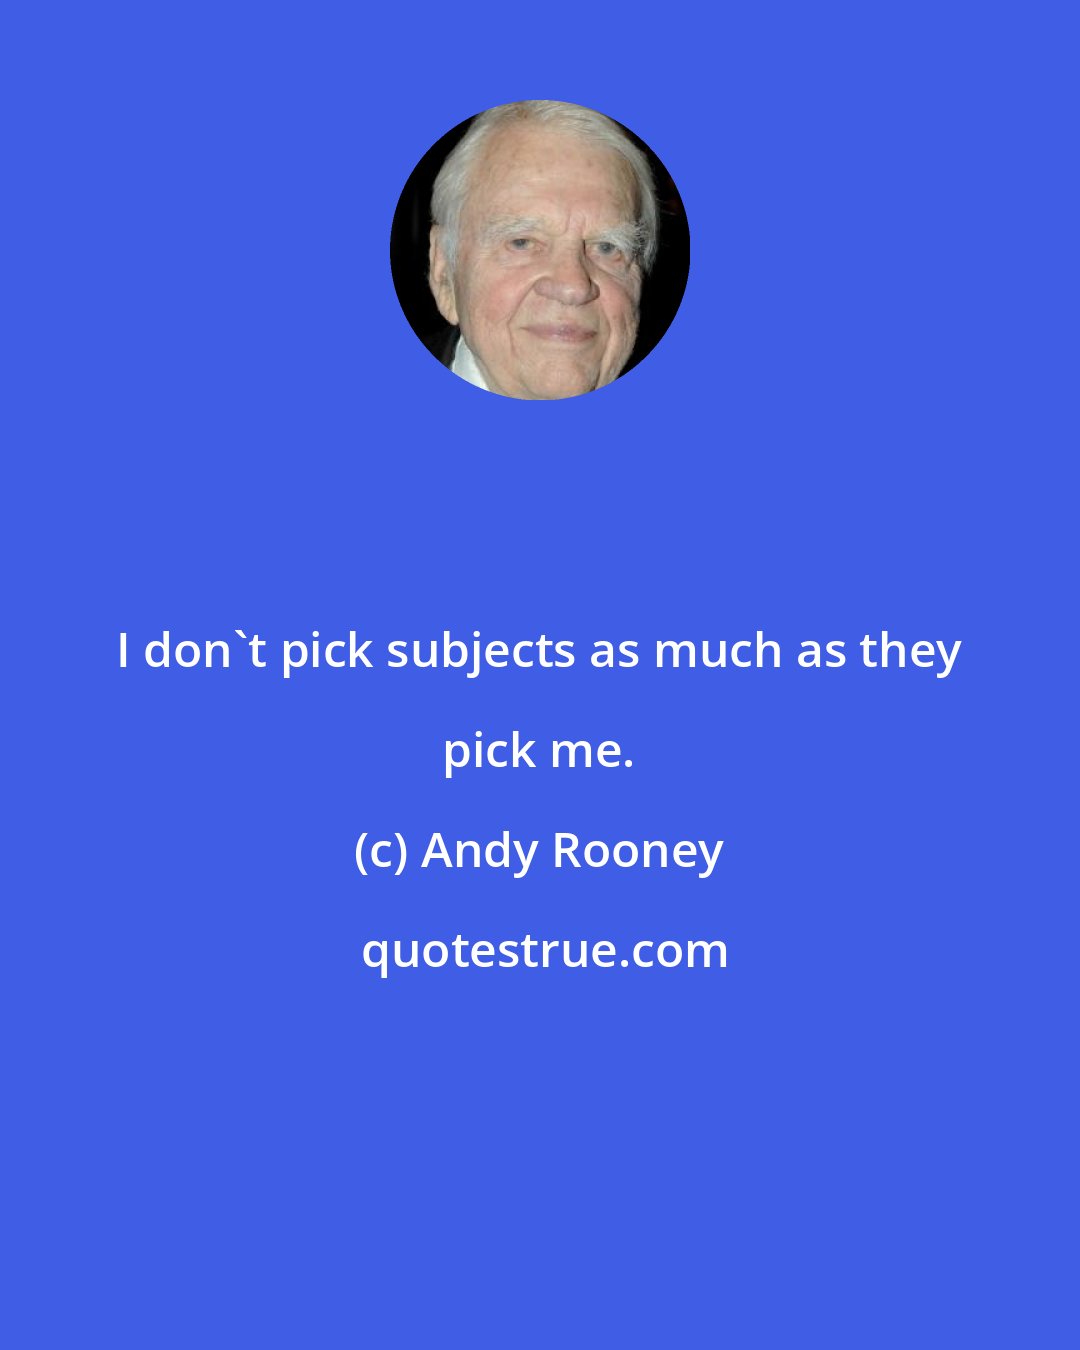 Andy Rooney: I don't pick subjects as much as they pick me.